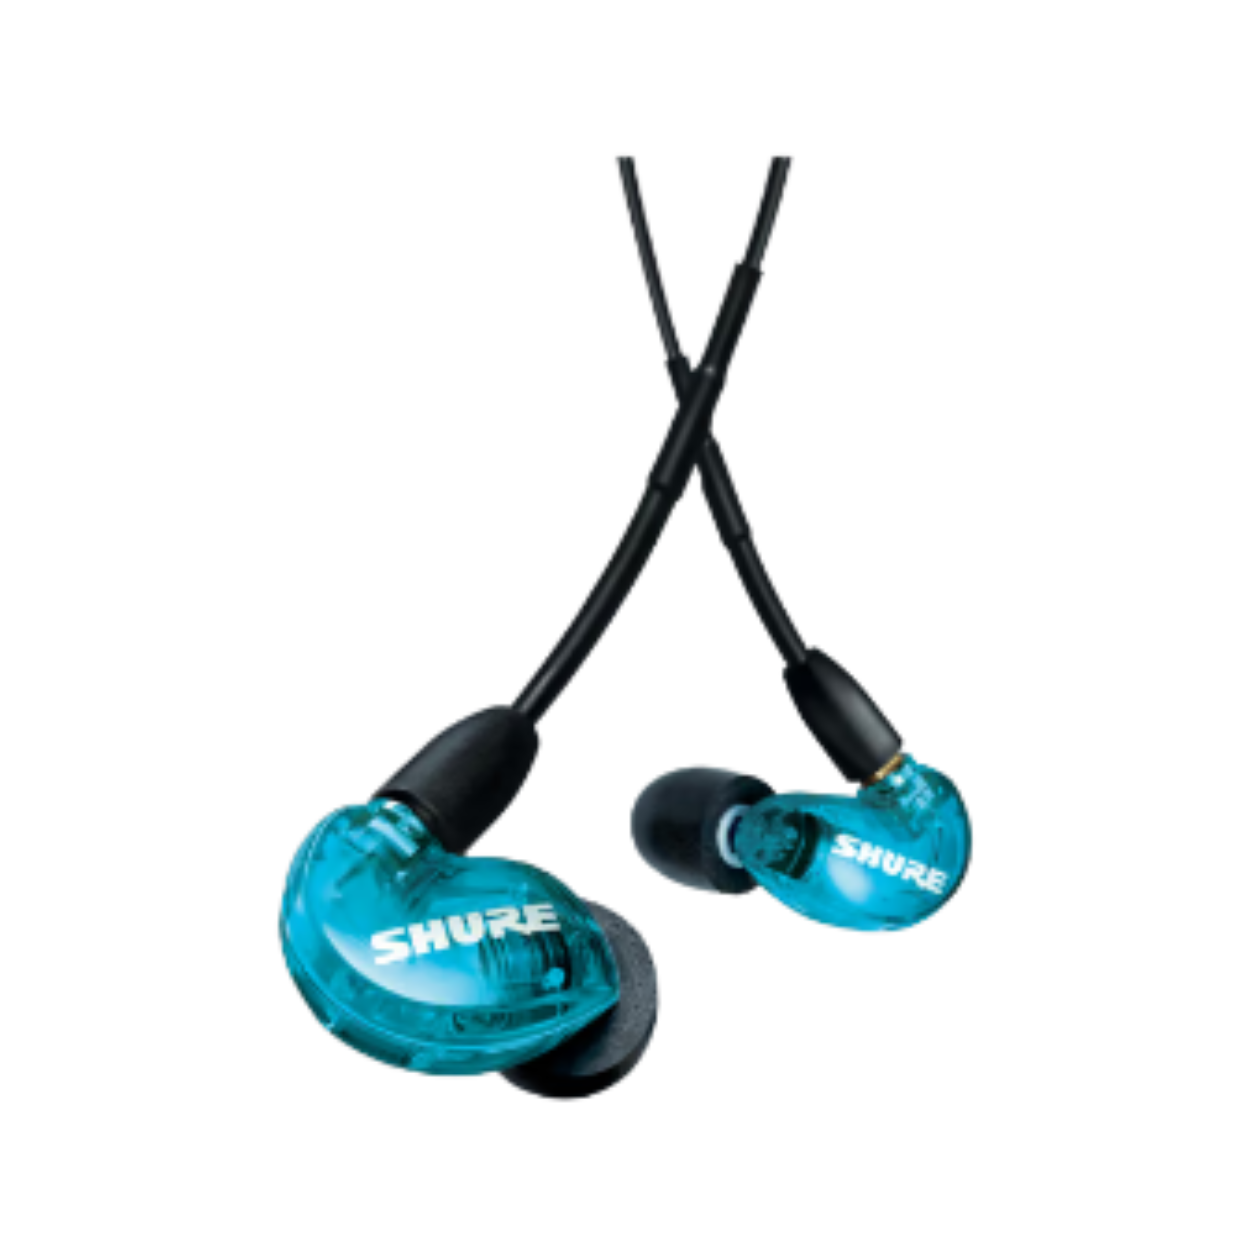 SHURE AONIC 215 SOUND ISOLATING EARPHONES - BLUE